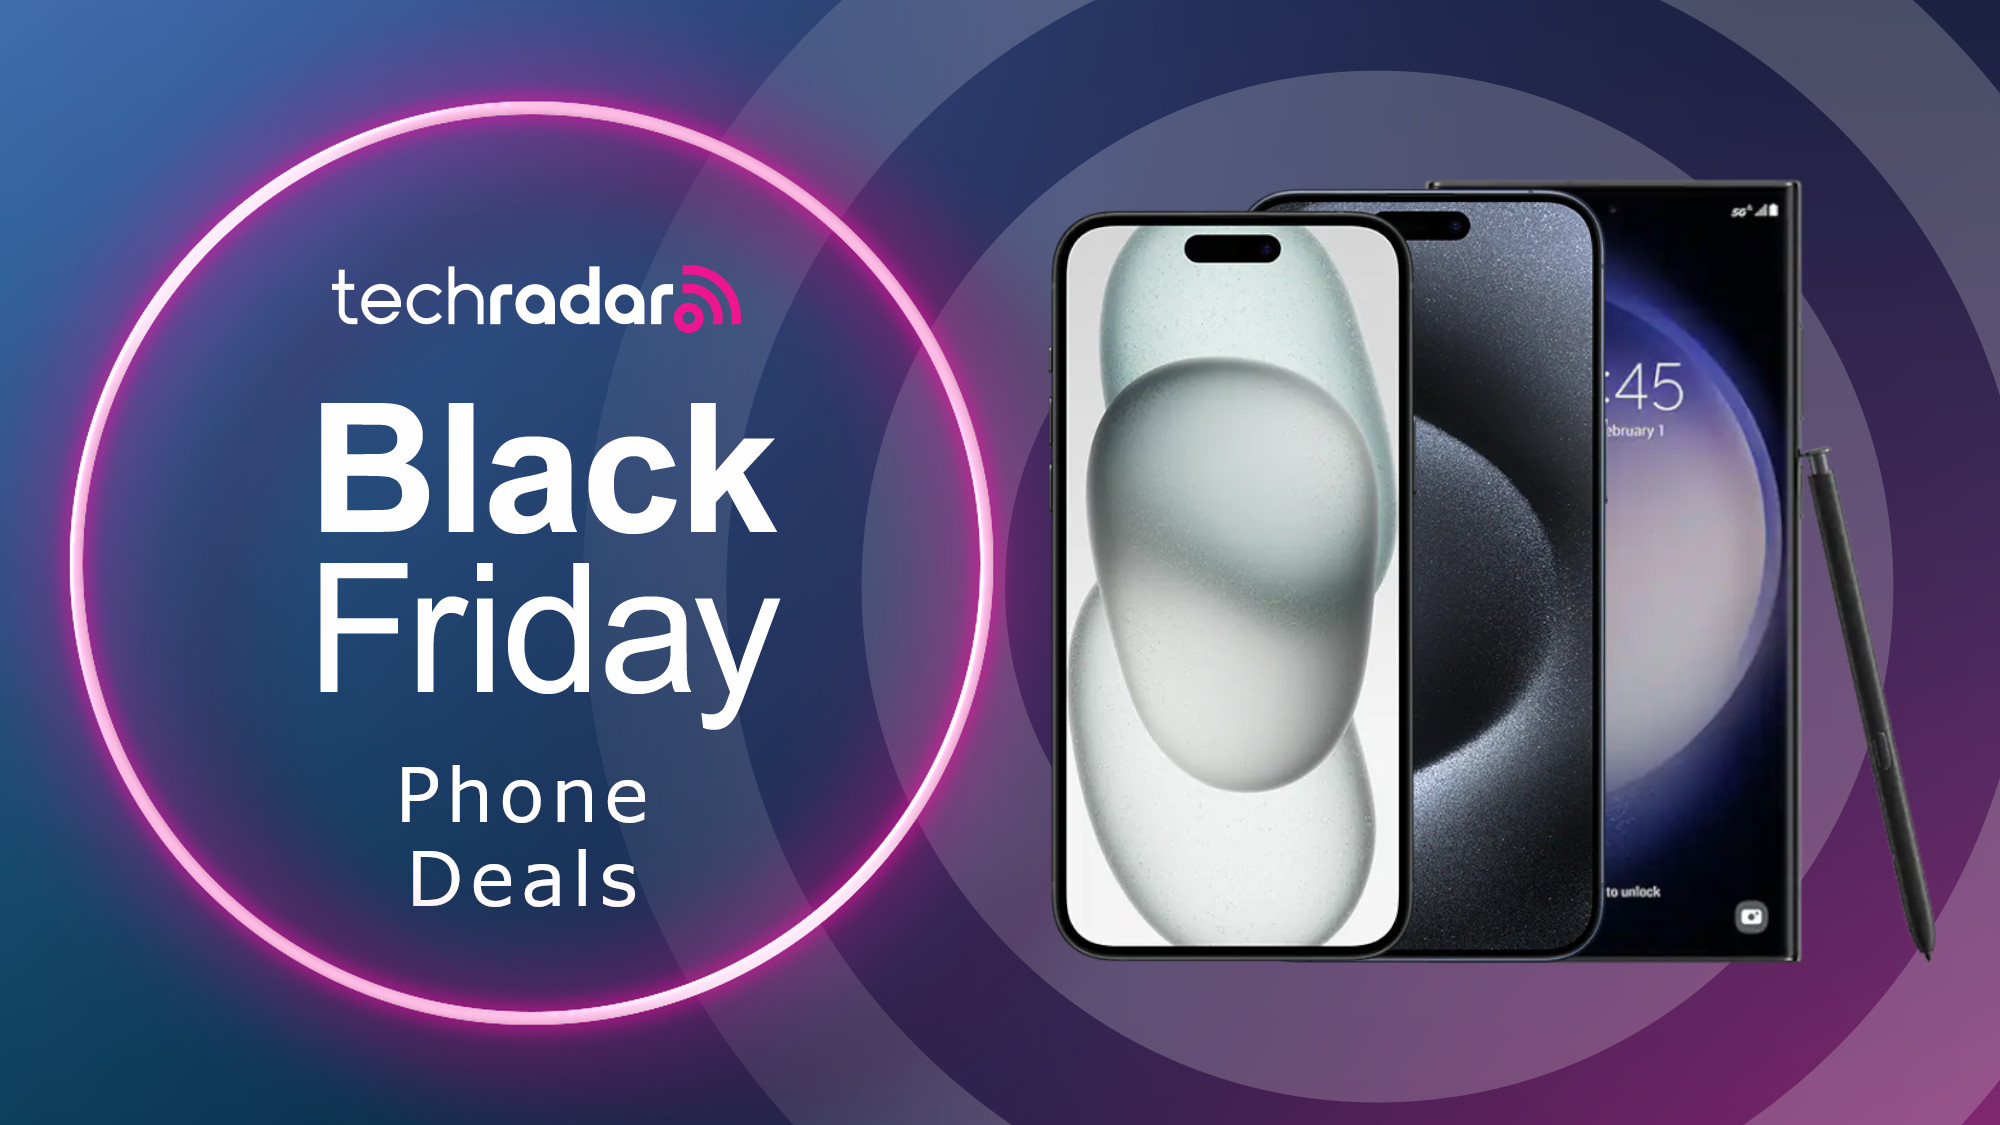 Black Friday phone deals 2023: Samsung, Apple and Google devices